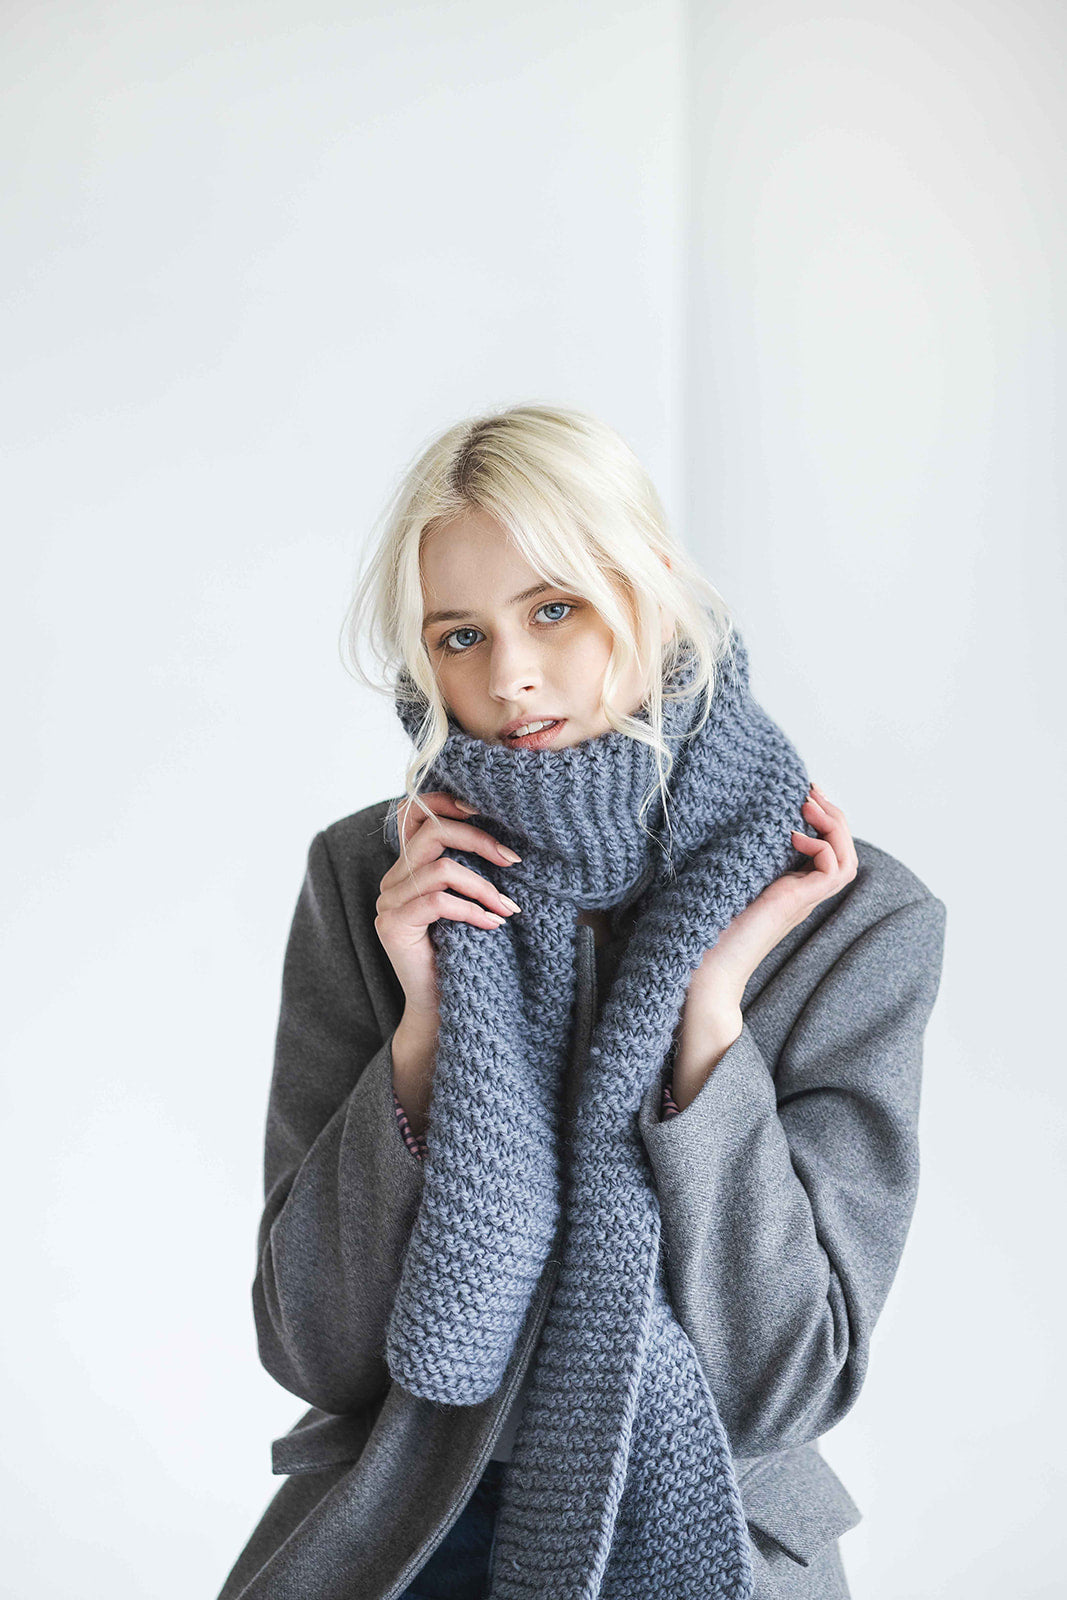 Gary chunky knit alpaca scarf. Grey cable knit wool scarf. Oversized blanket scarf. Long women, men, unisex scarves. Gift for her, him